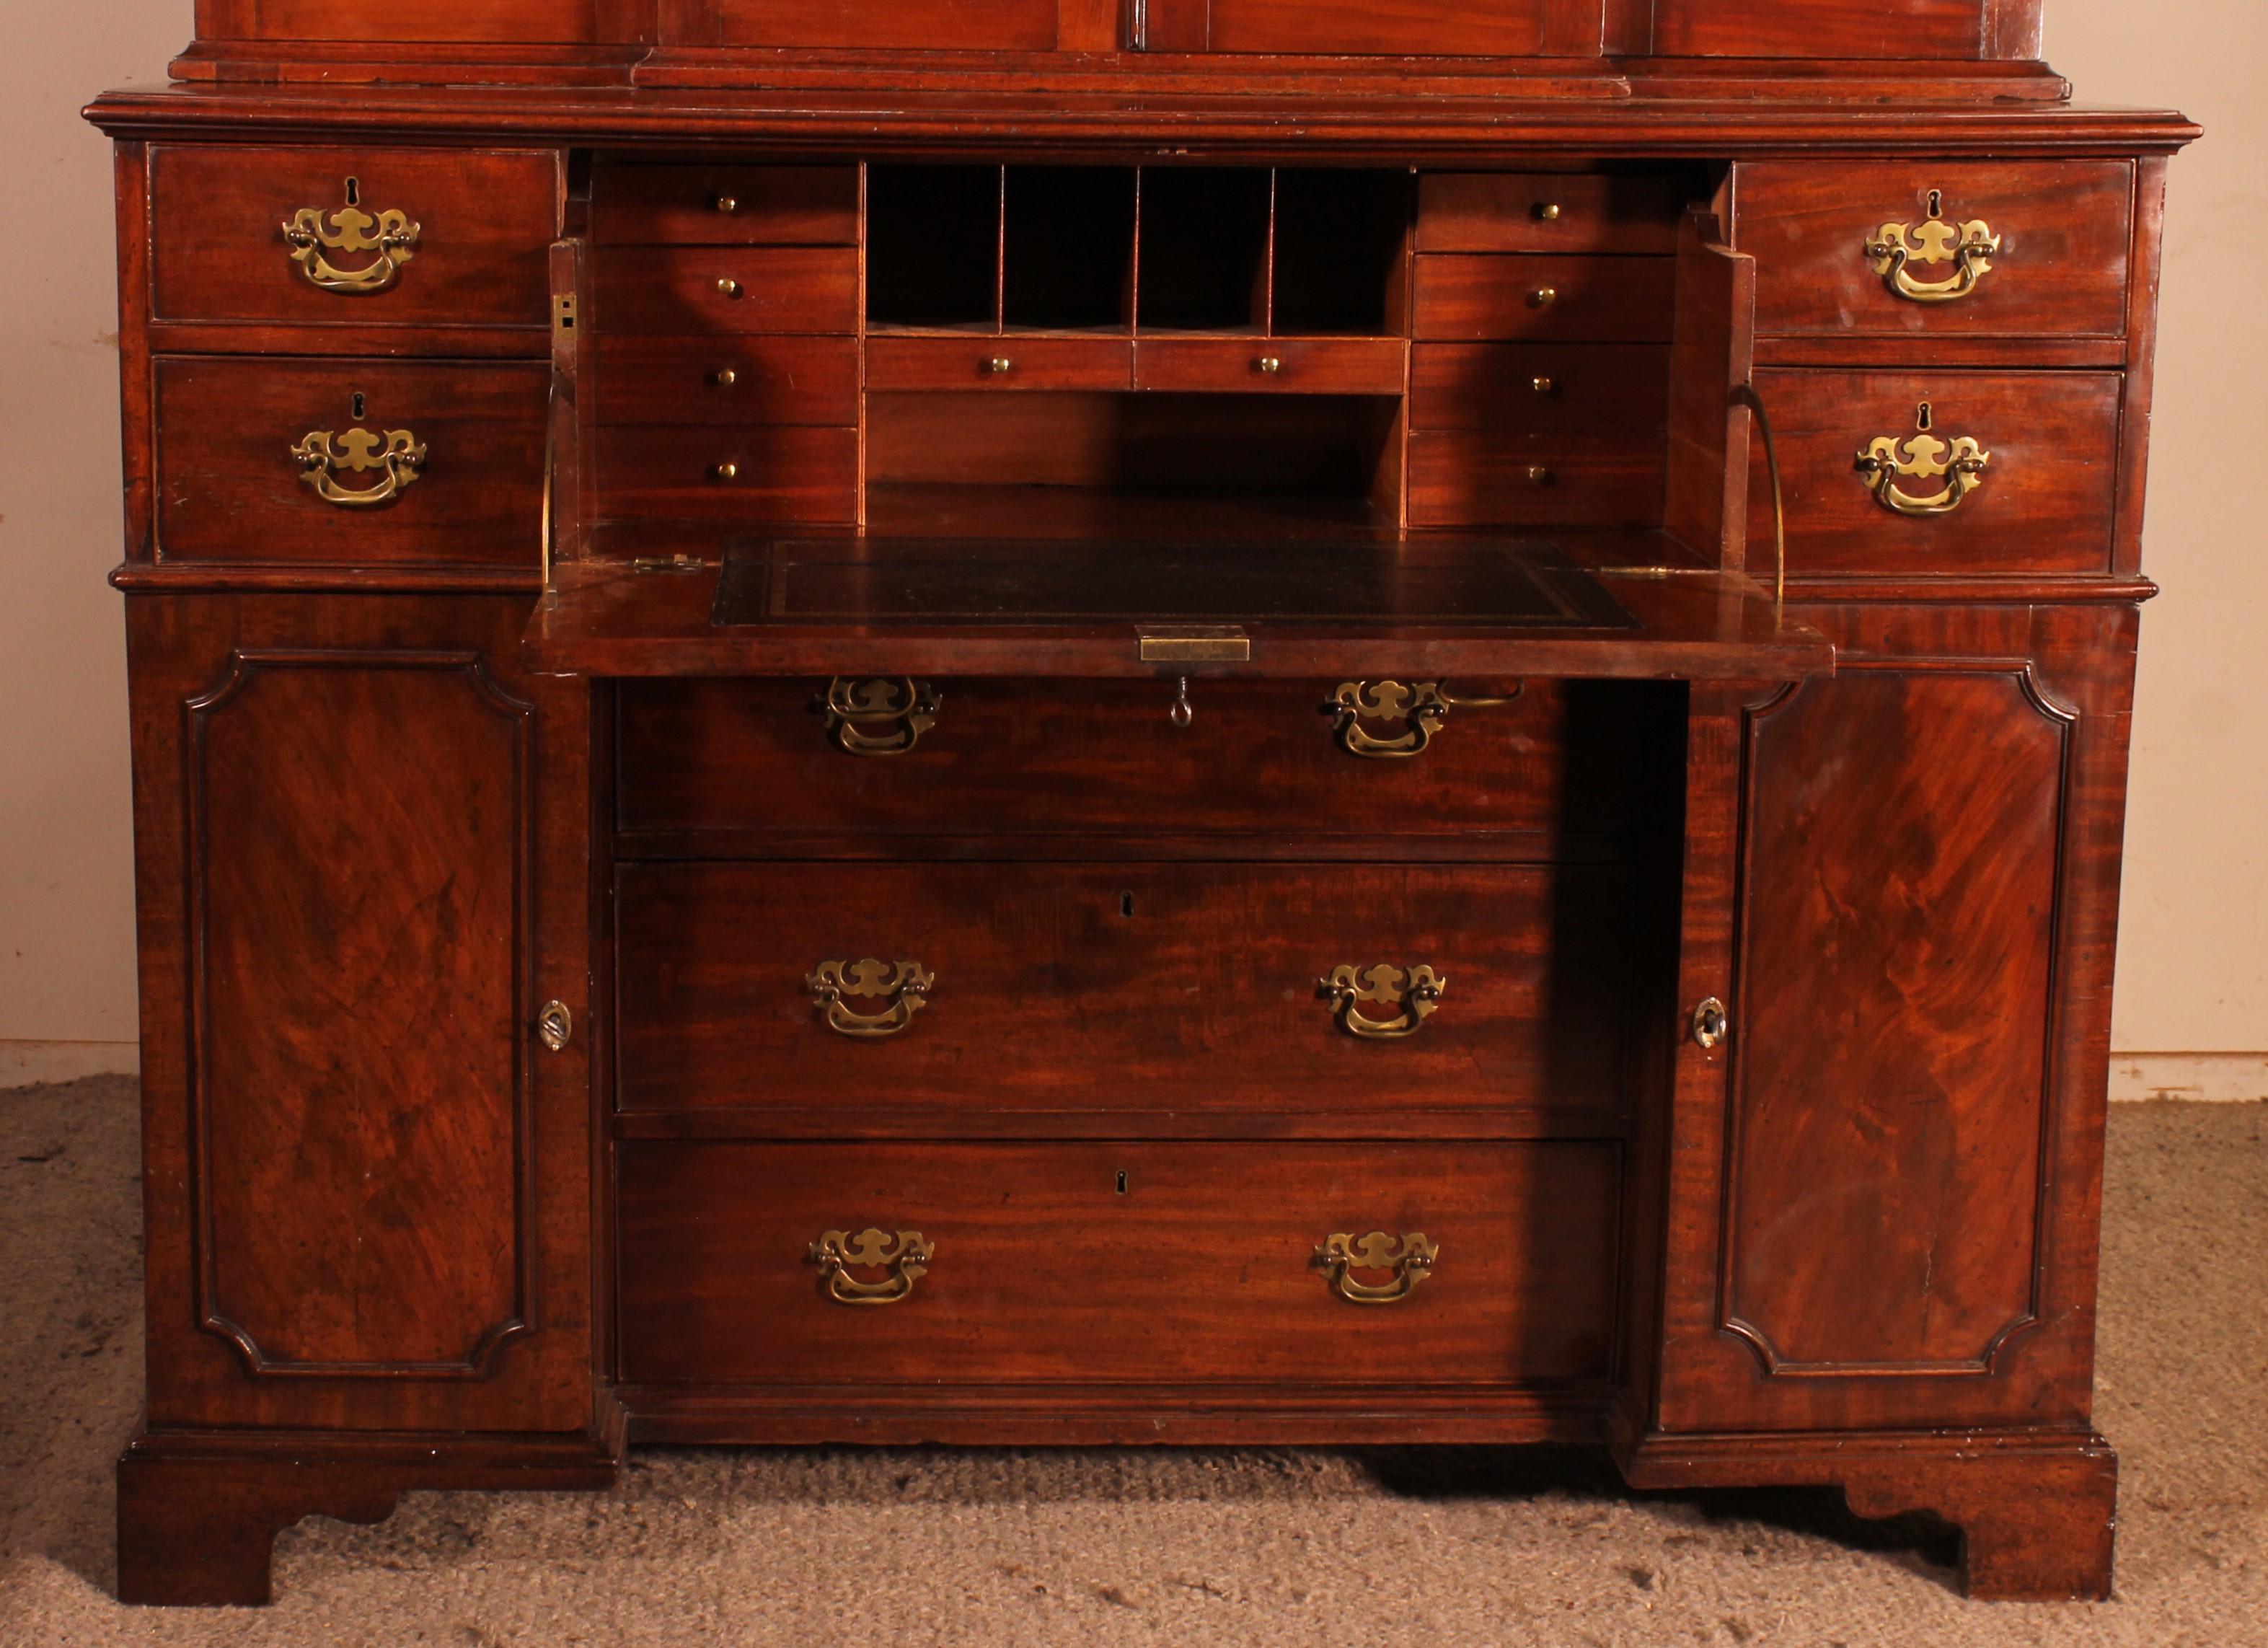 Georgian Mahogany Showcase Cabinet Or Library From The 18th Century For Sale